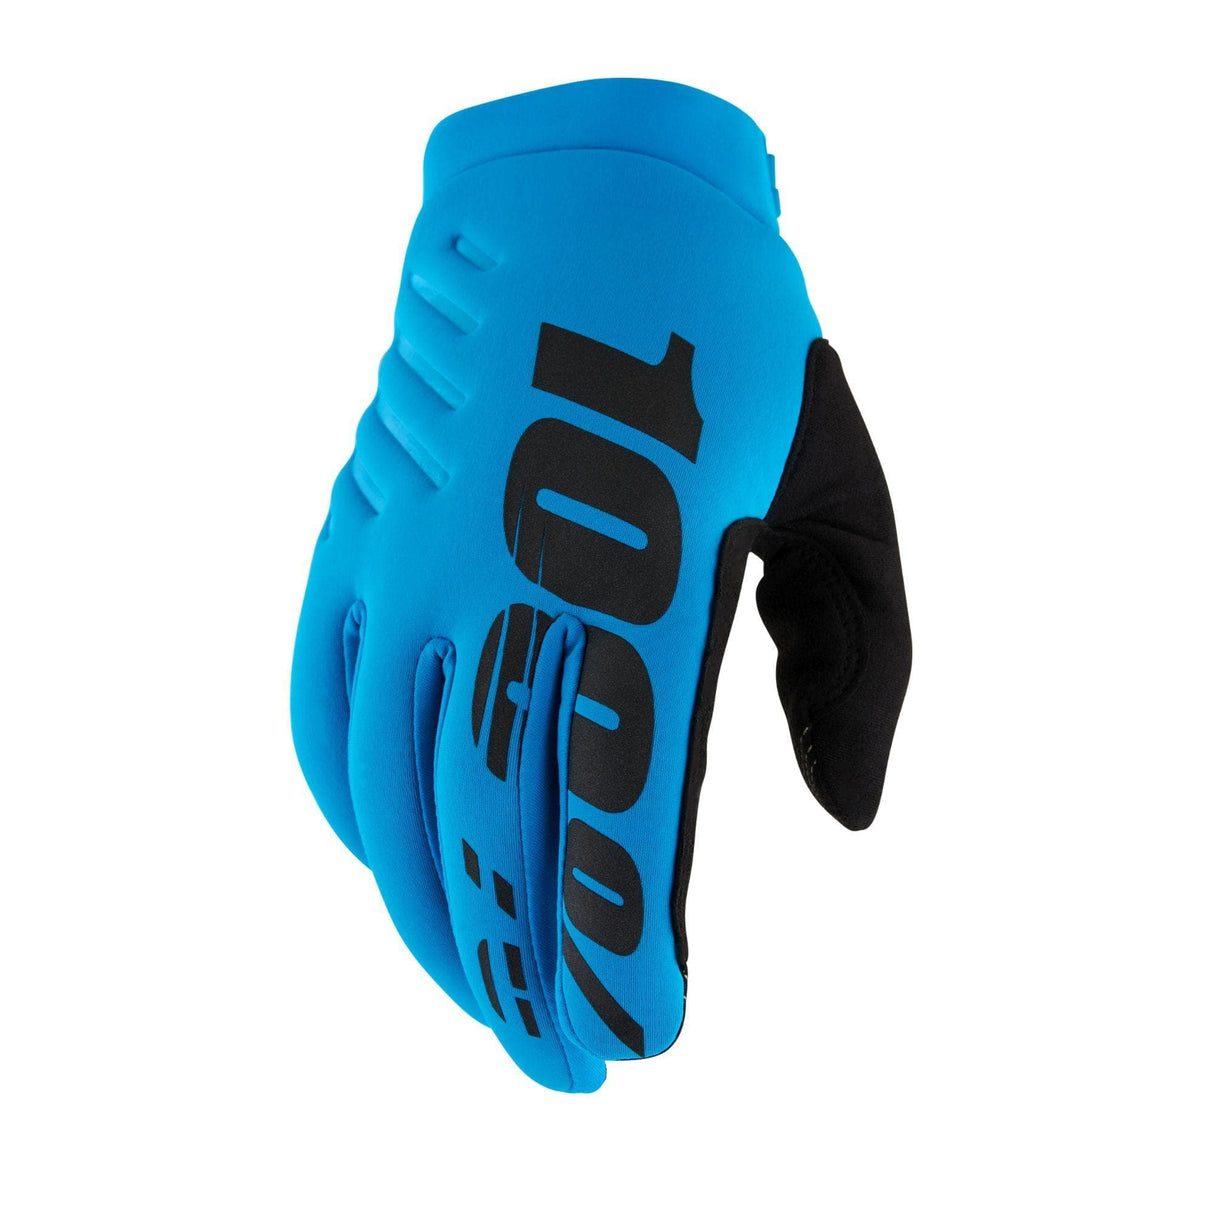 100% Brisker Cold Weather Glove - Turquoise - Large